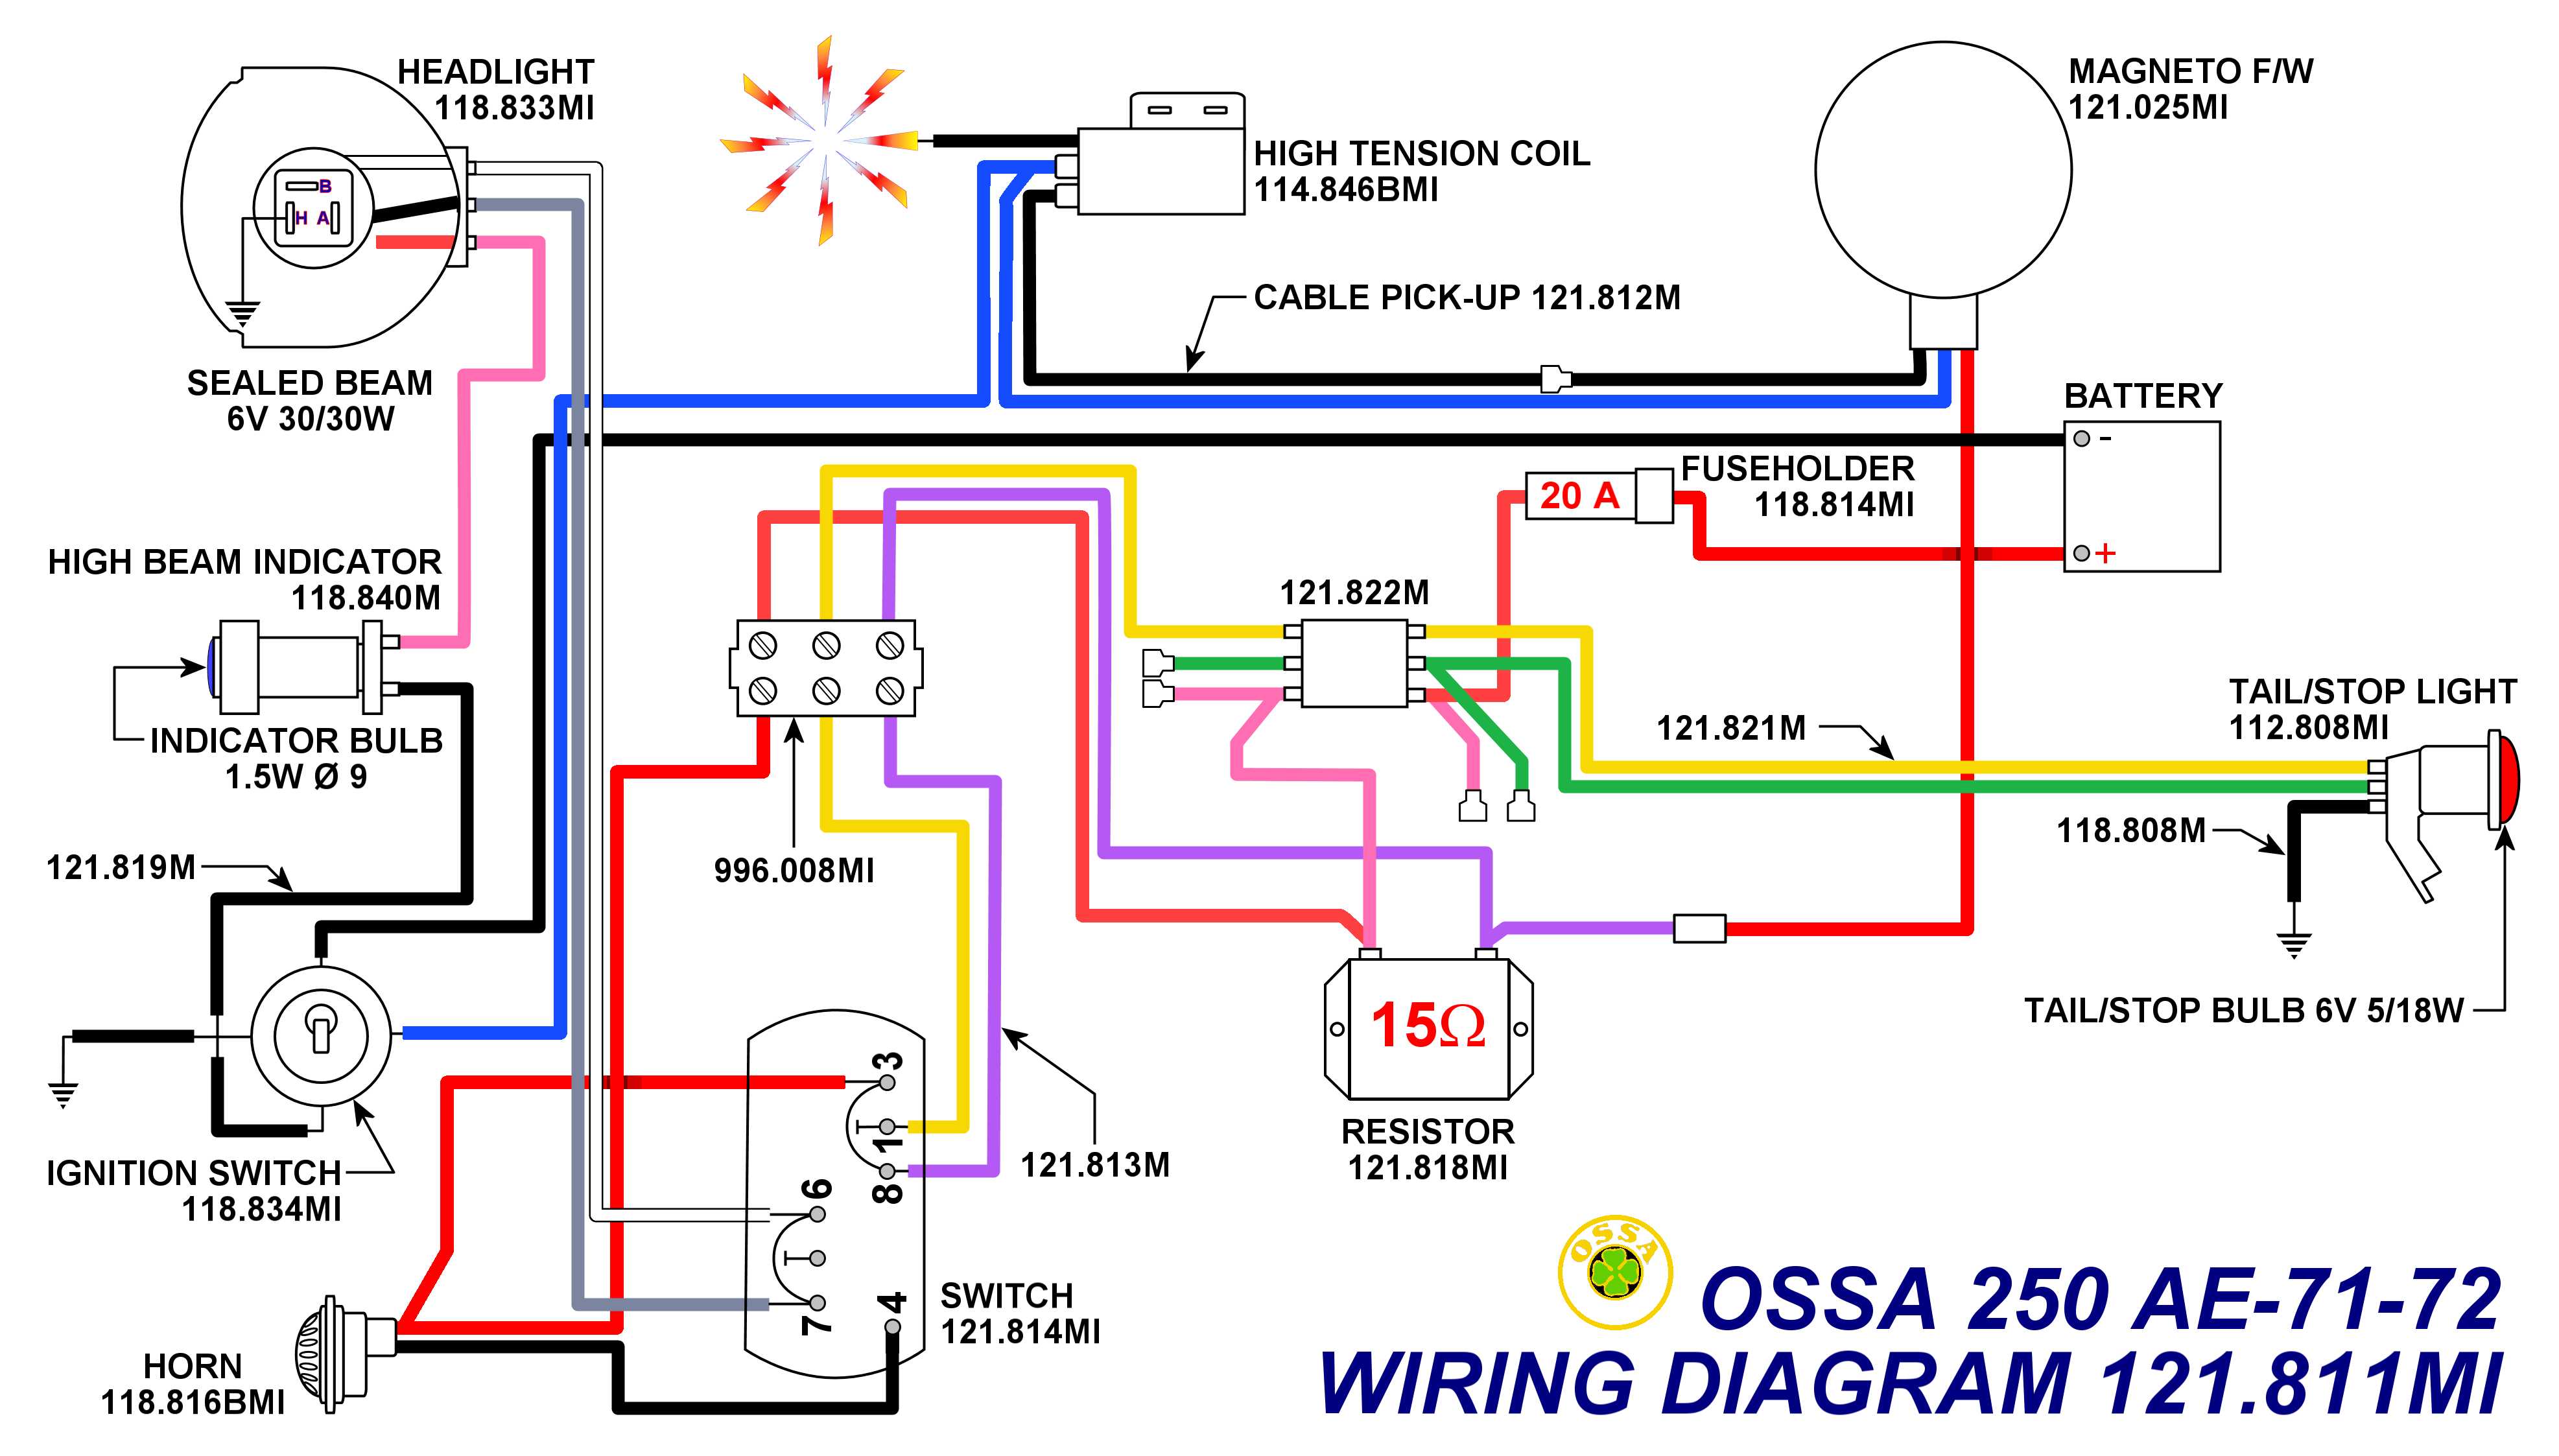 1974 Yamaha Dt175-a Wiring Diagram